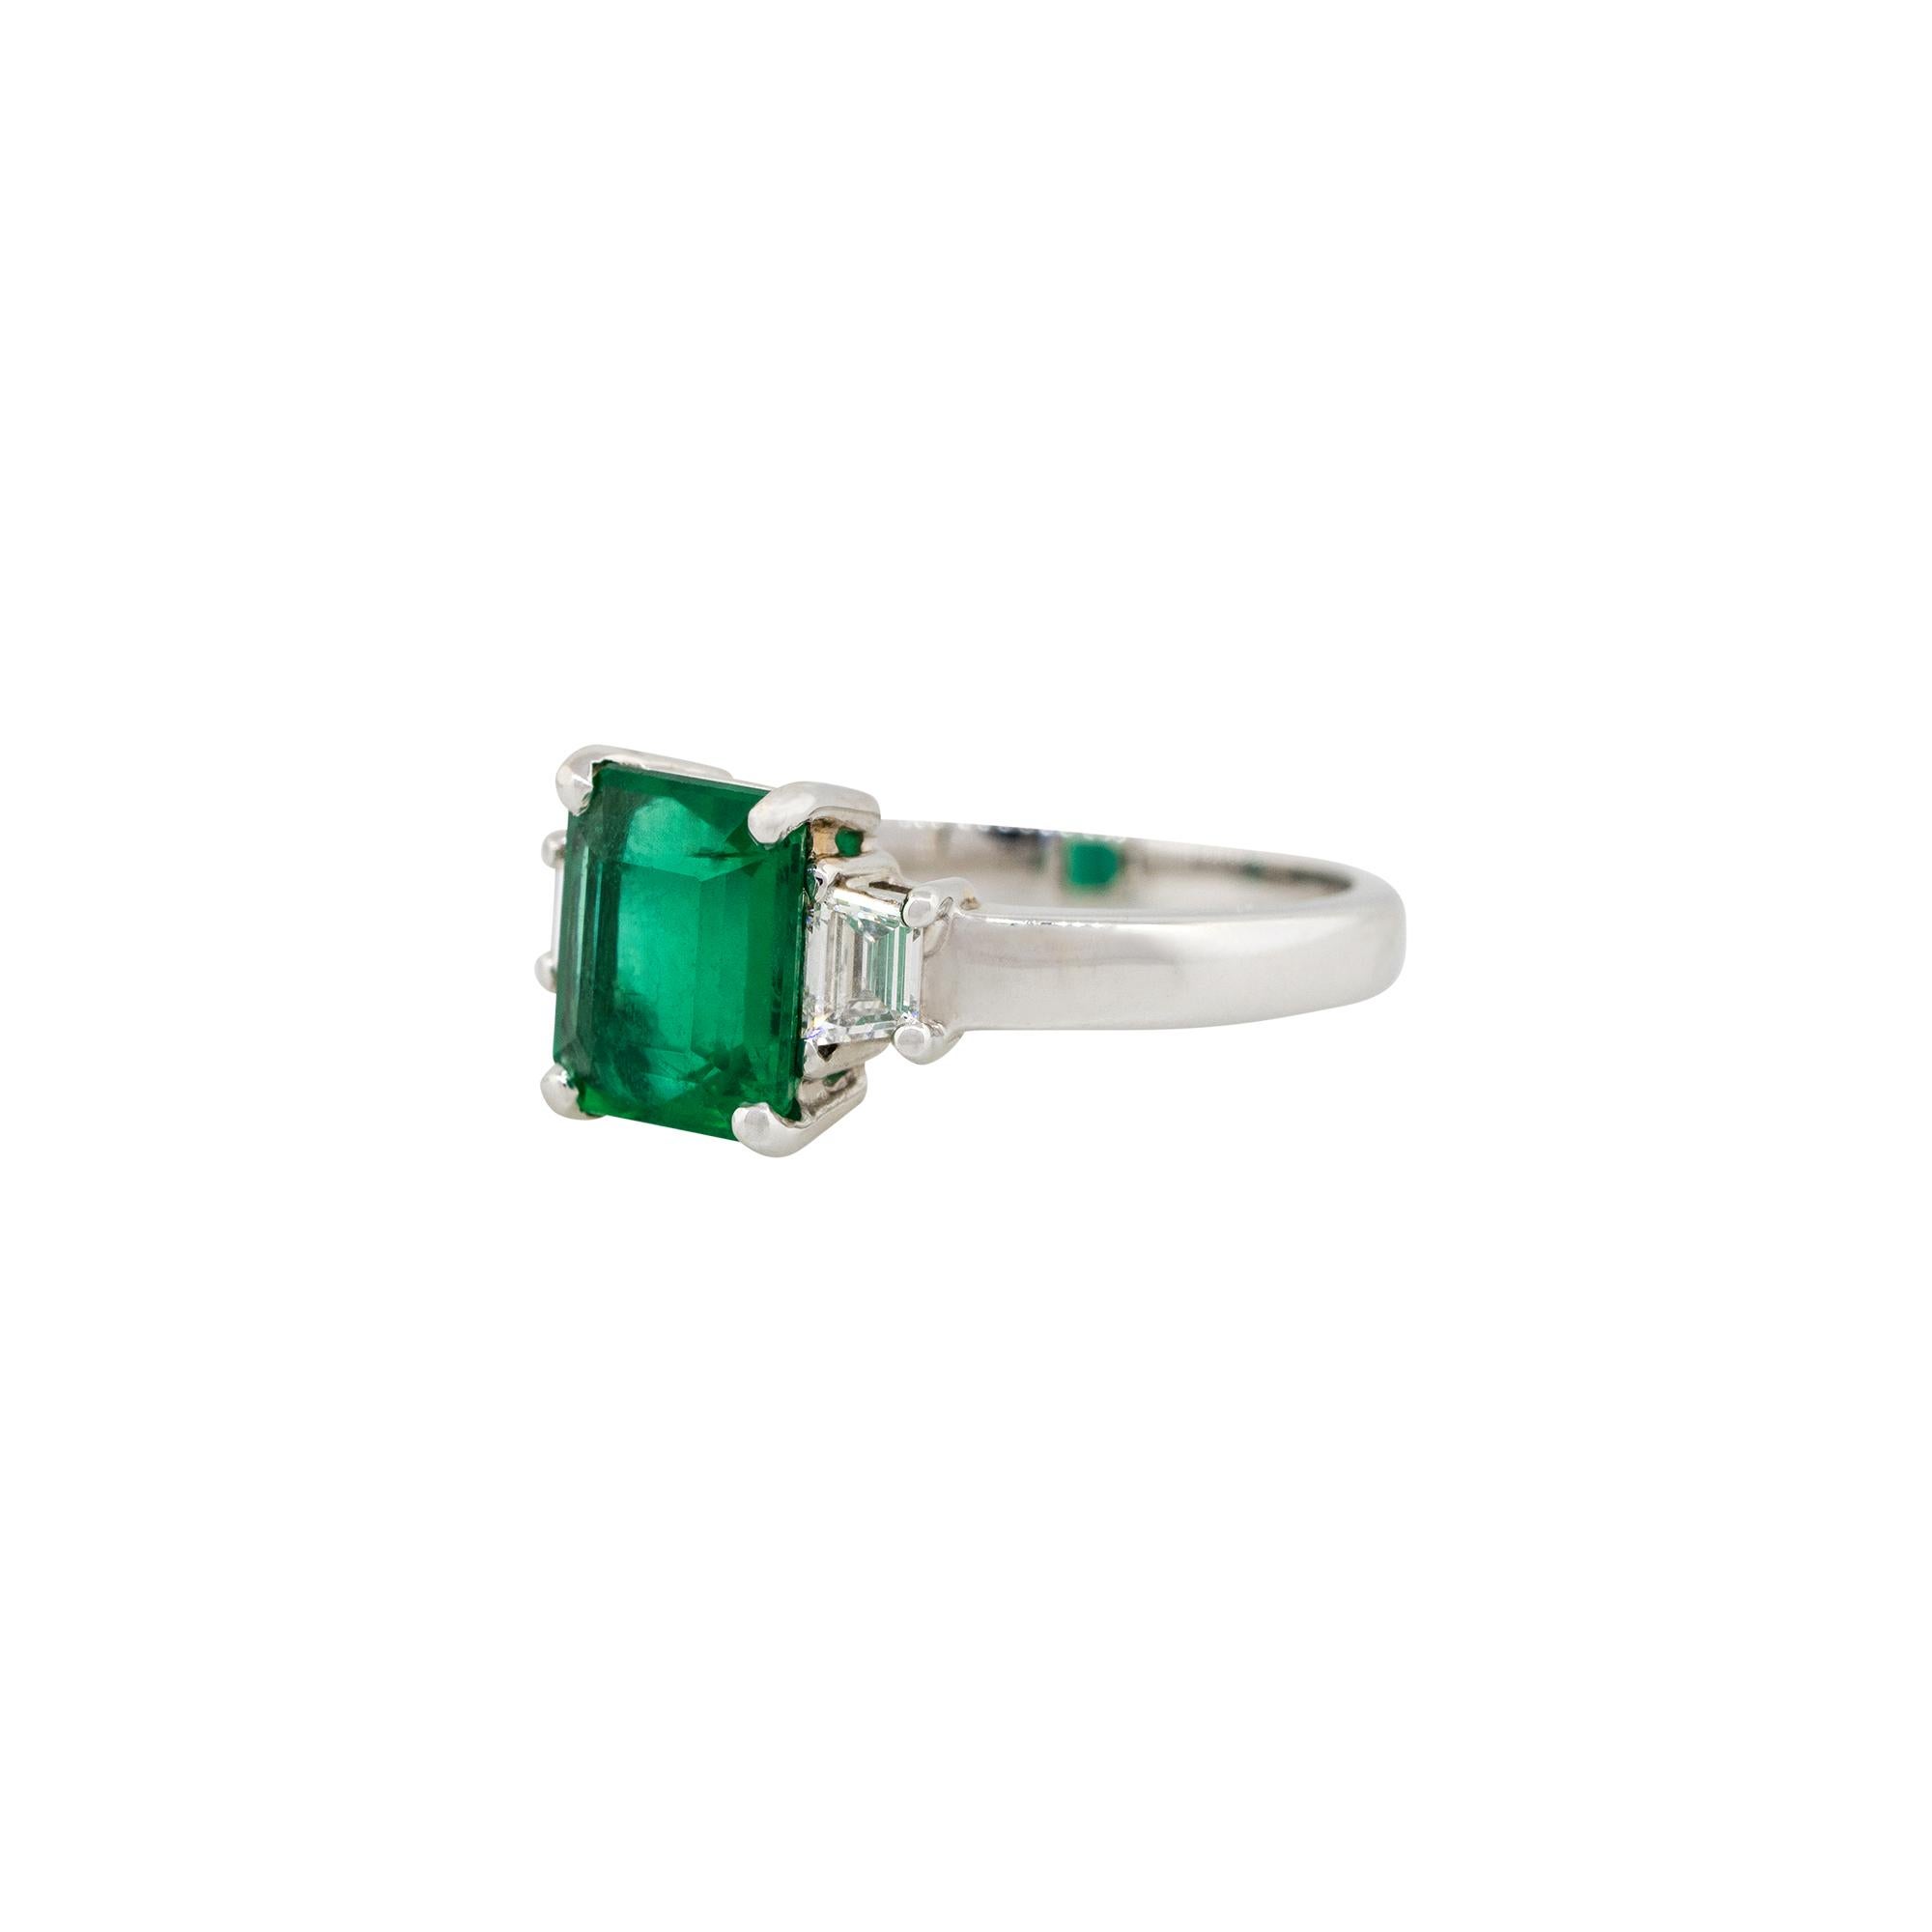 Material: 18k White Gold
Diamond details: Approx. 0.29ctw of trapezoid diamonds. Diamonds are G/H in color and VS in clarity
Gemstone details: Approx. 2.02ct emerald. Center: 8.9mm x 7.7mm
Ring Size: 7
Ring Measurements: 0.35